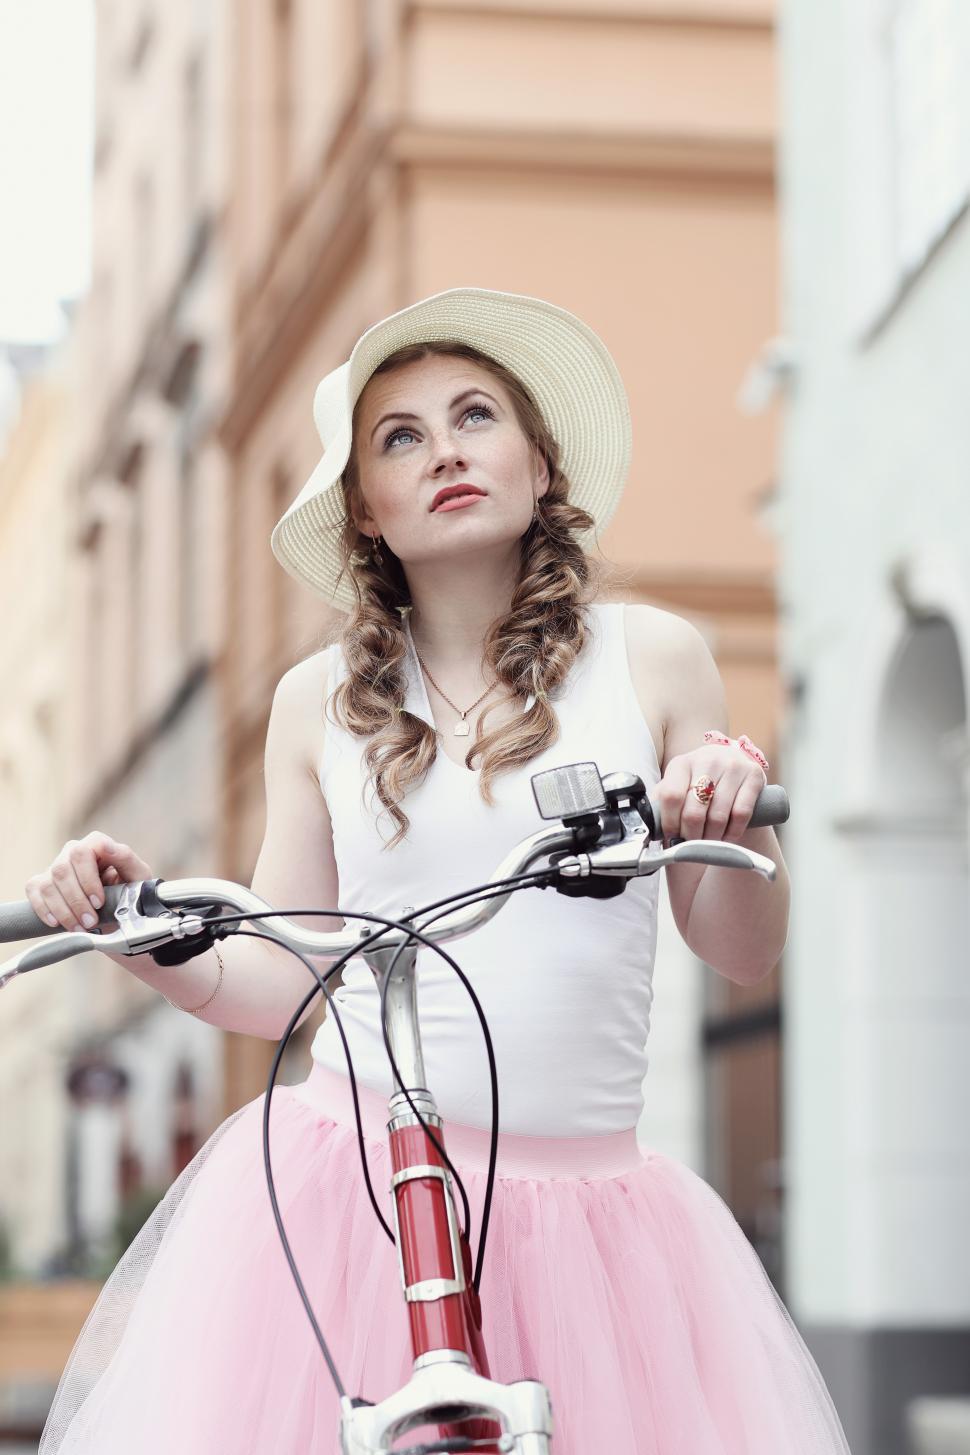 Free Image of Woman in the city with a bicycle 